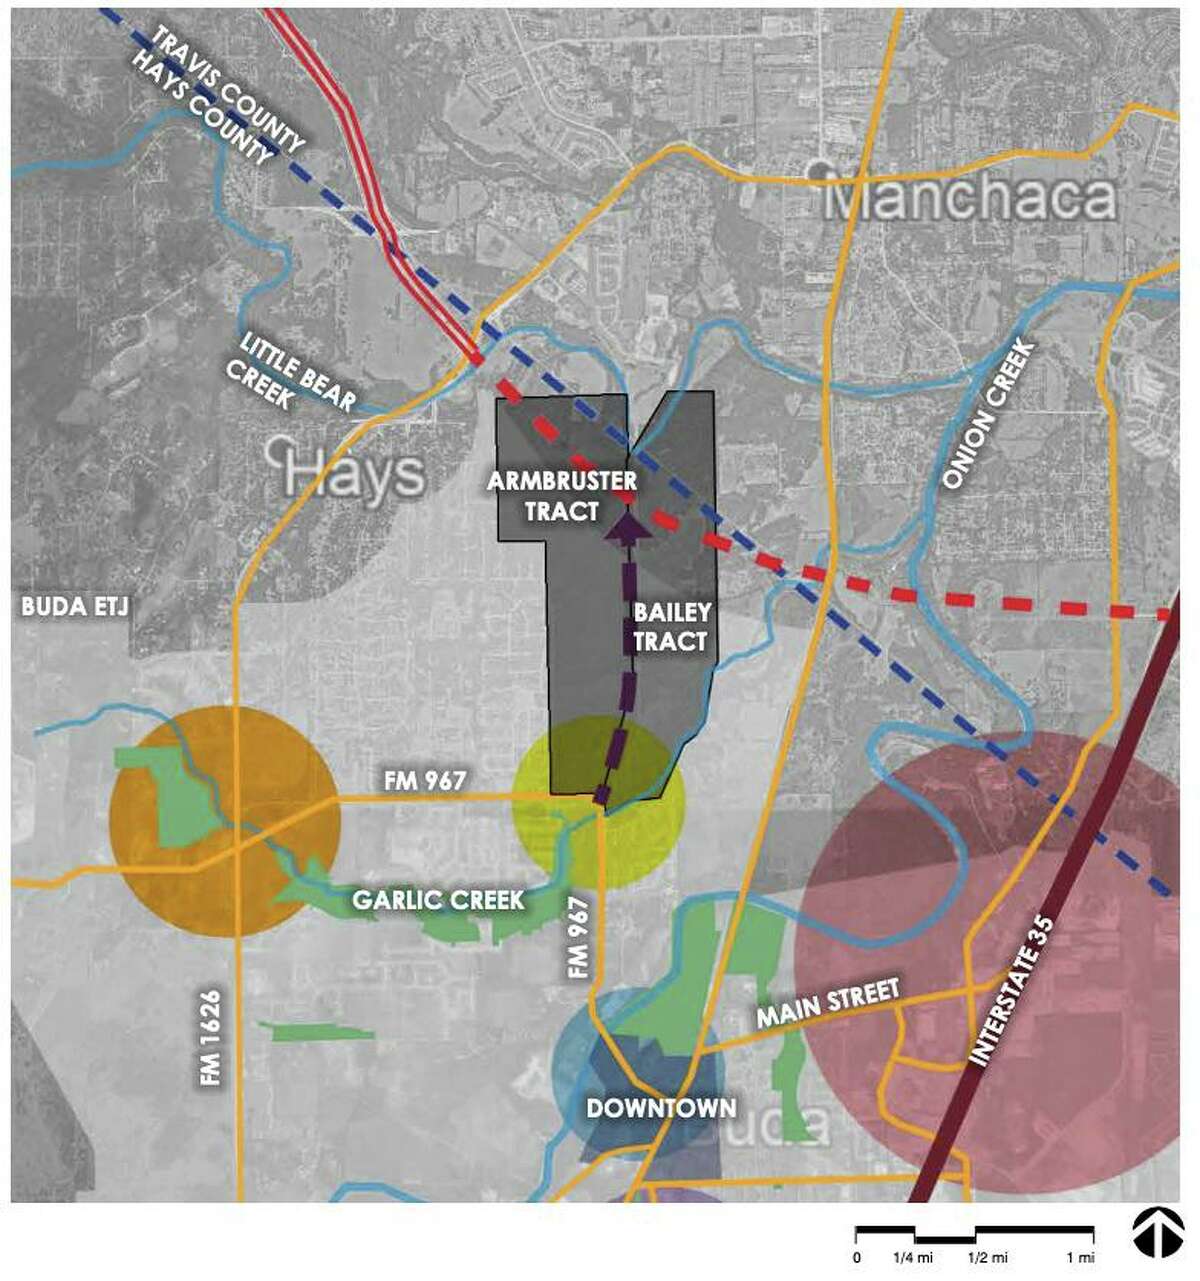 A rendering shows the Bailey and Armbruster tracts for the Persimmon development. About 60% of the development will be in Buda and its ETJ, while the rest will be in Austin’s ETJ.